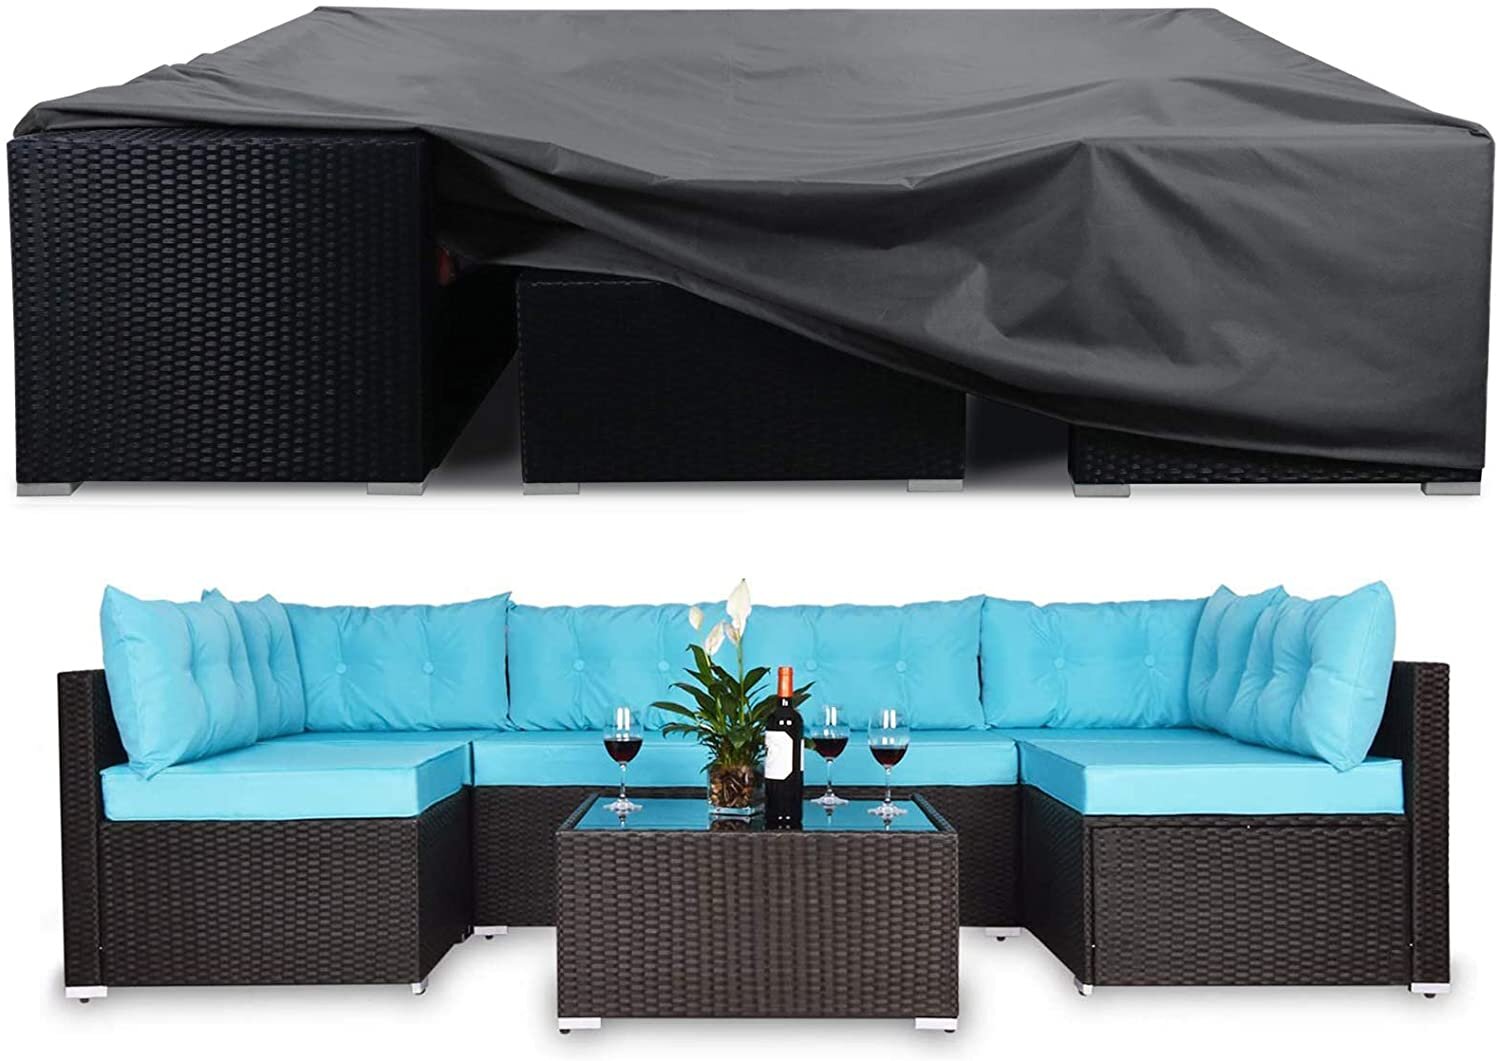 Waterproof Sofa Cover Chair Couch Patio Chair Cover Outdoor Furniture Protector 